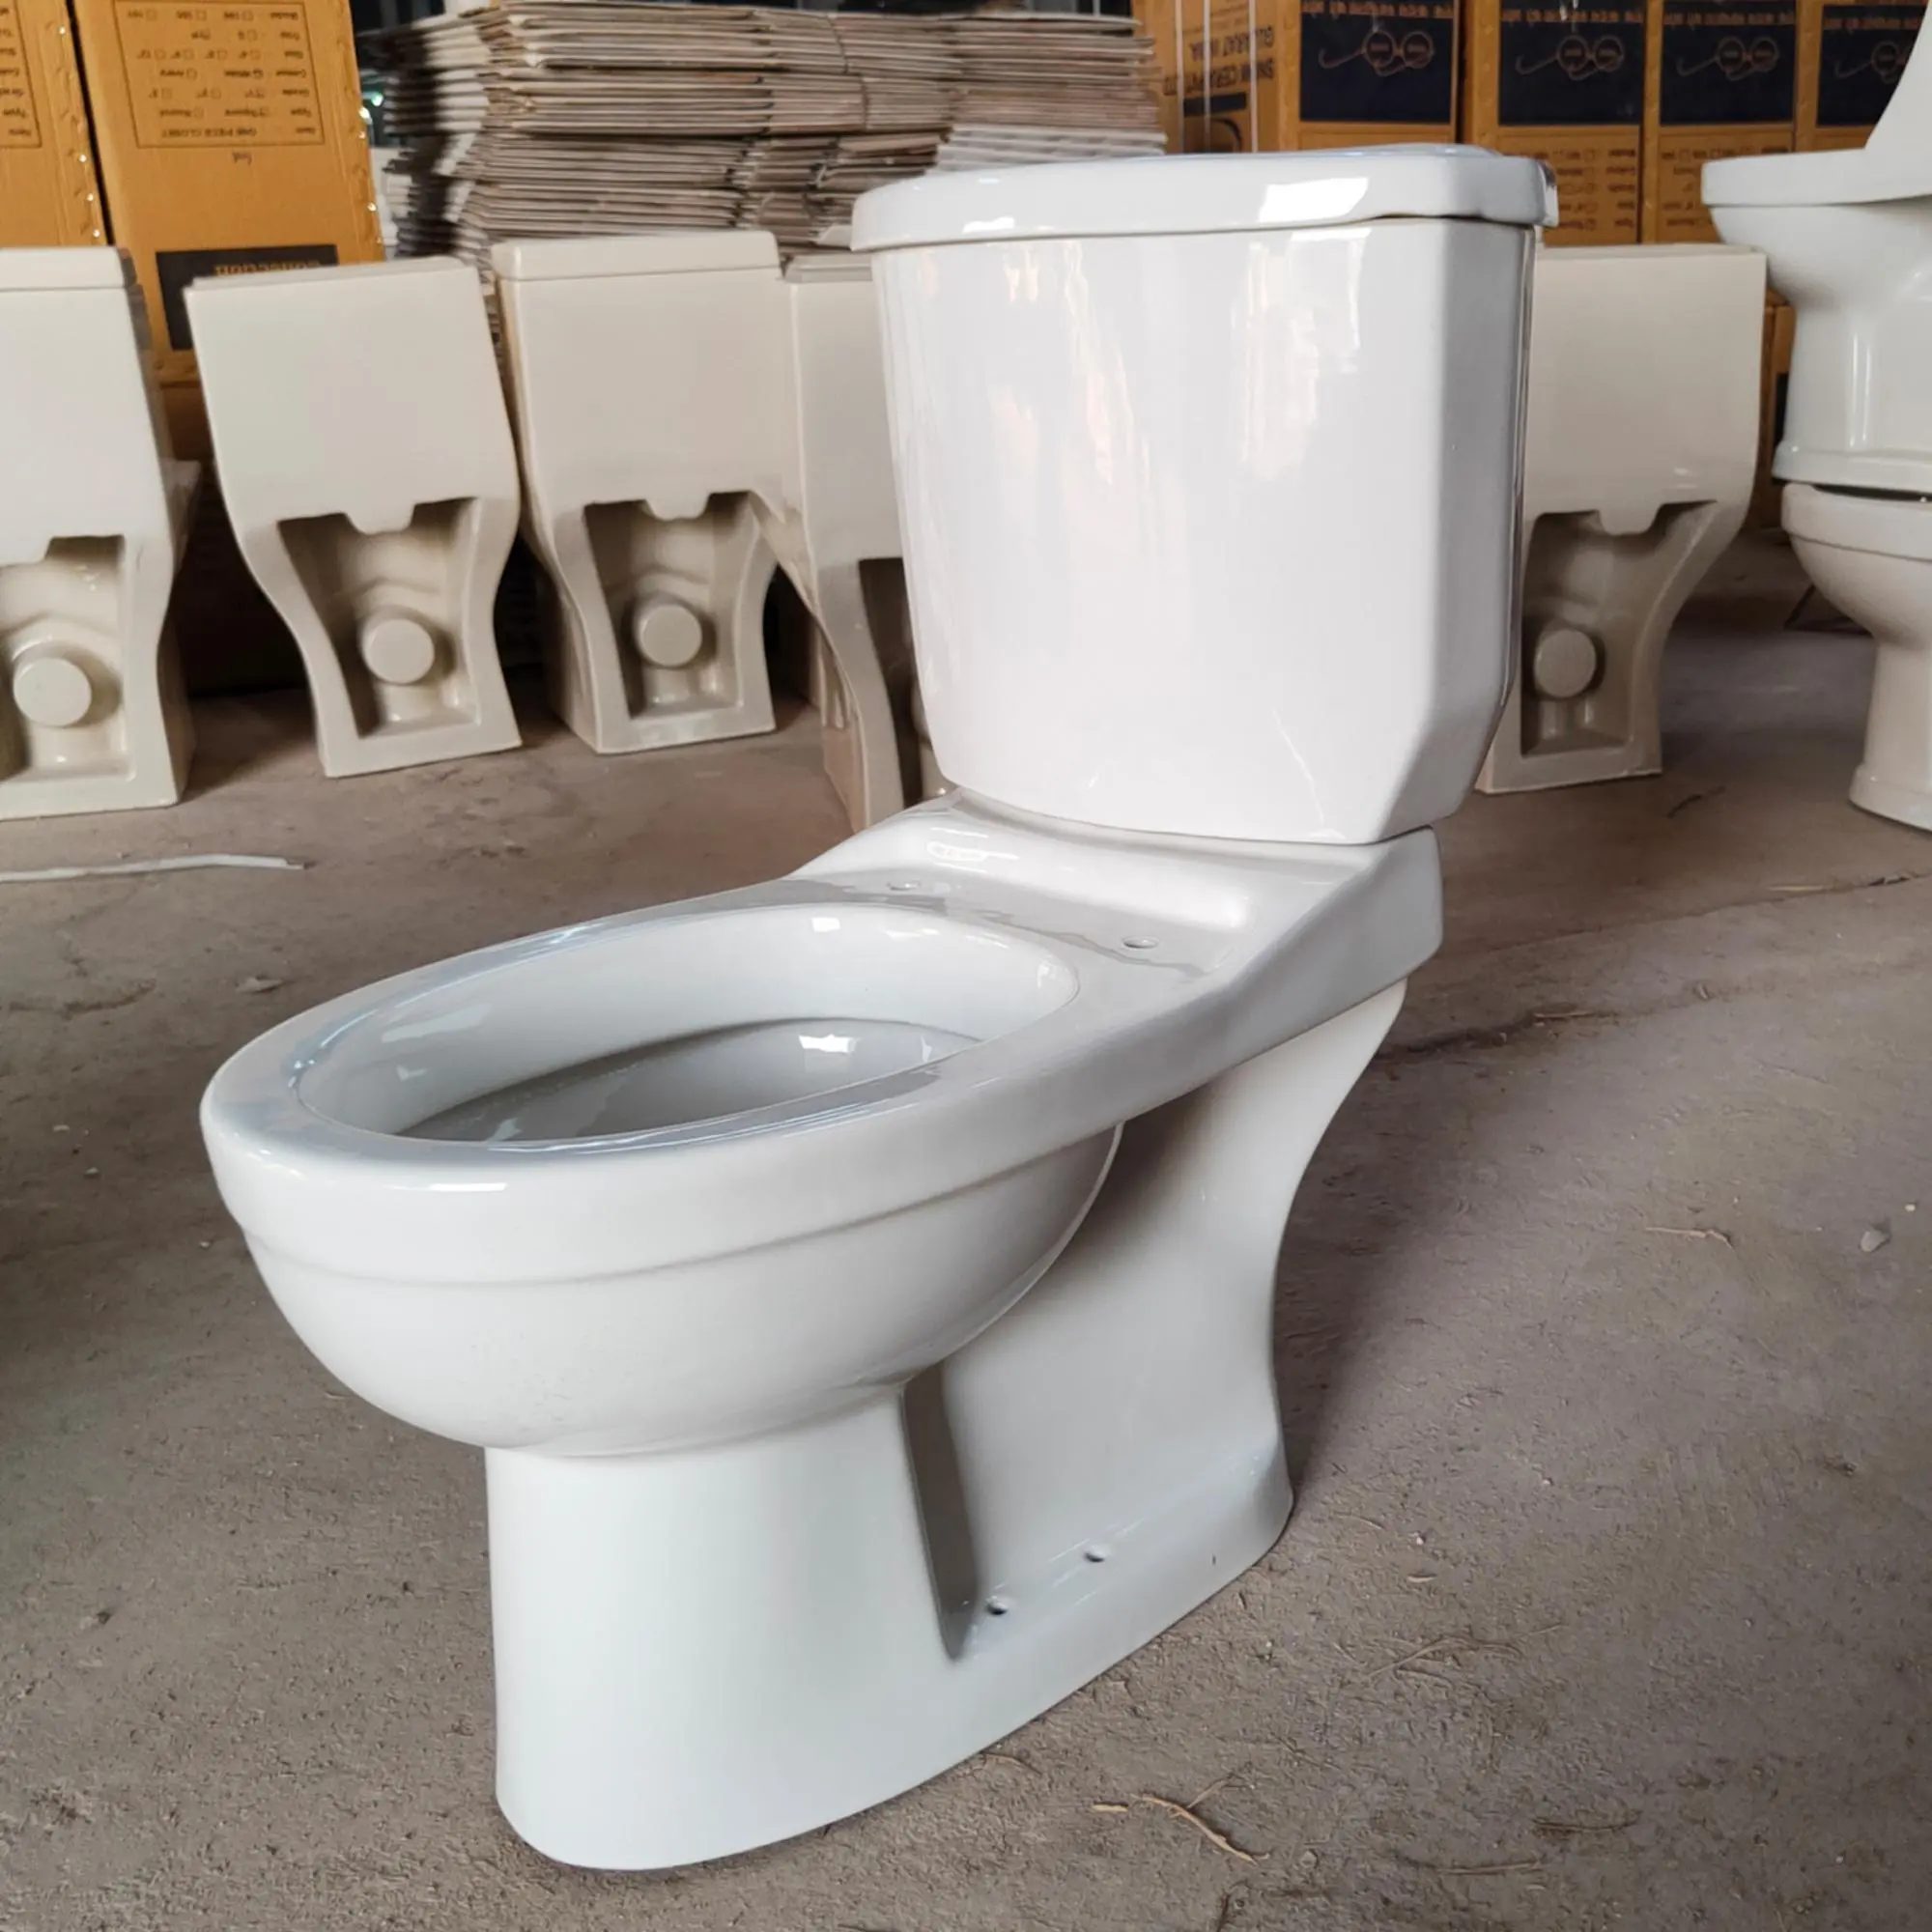 Ceramic Two Pieces P / S - Trap Sanitary Ware Dual Flush Water Closet with Side Flushing Porcelain Bathroom Aqua Pan WC Commode